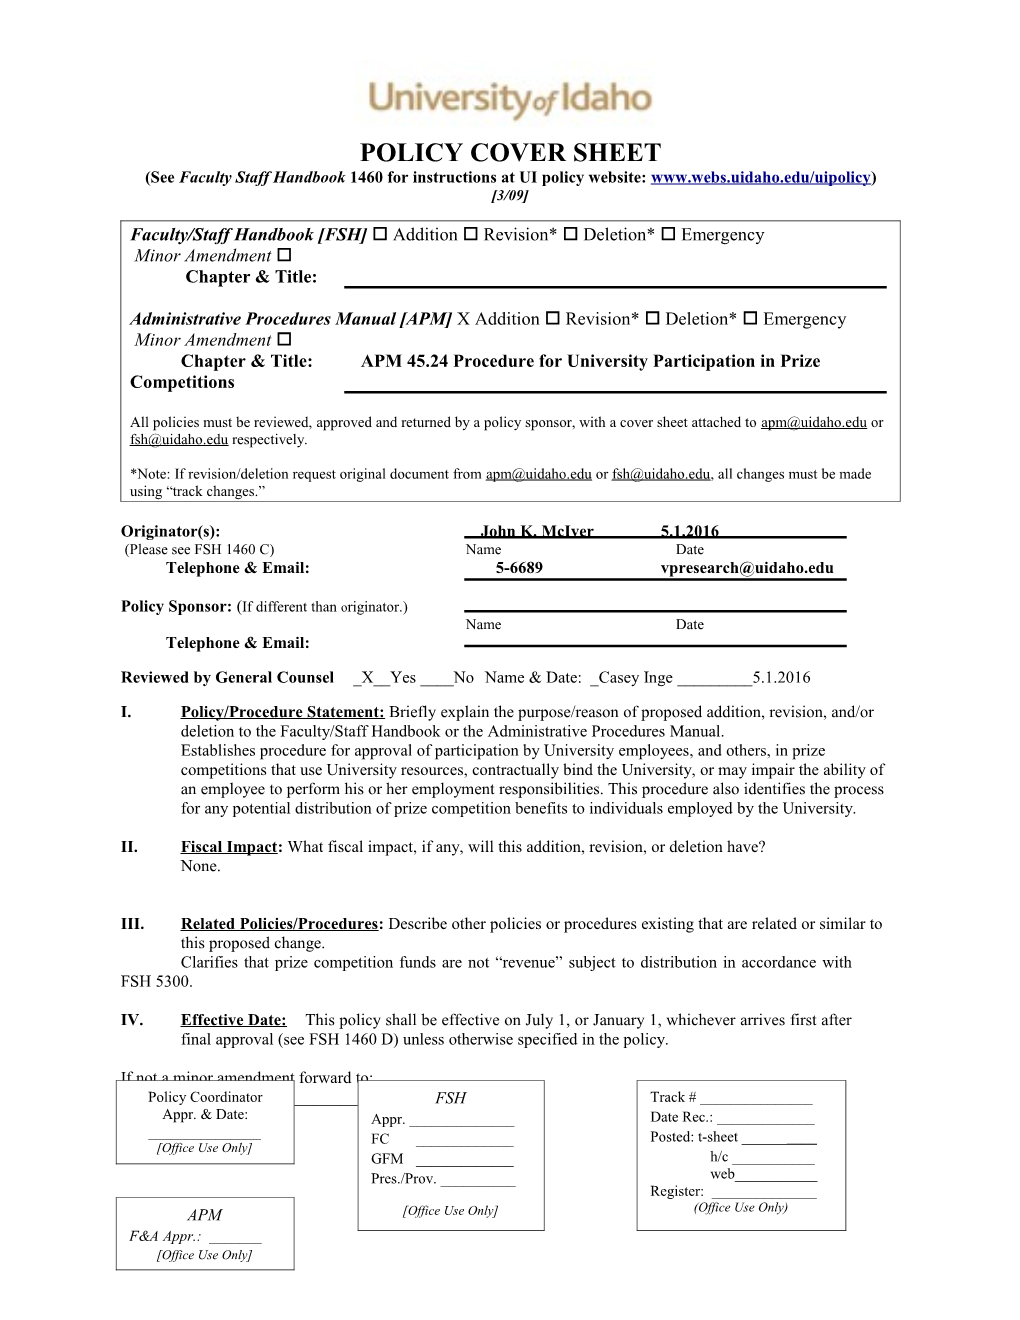 Policy Cover Sheet